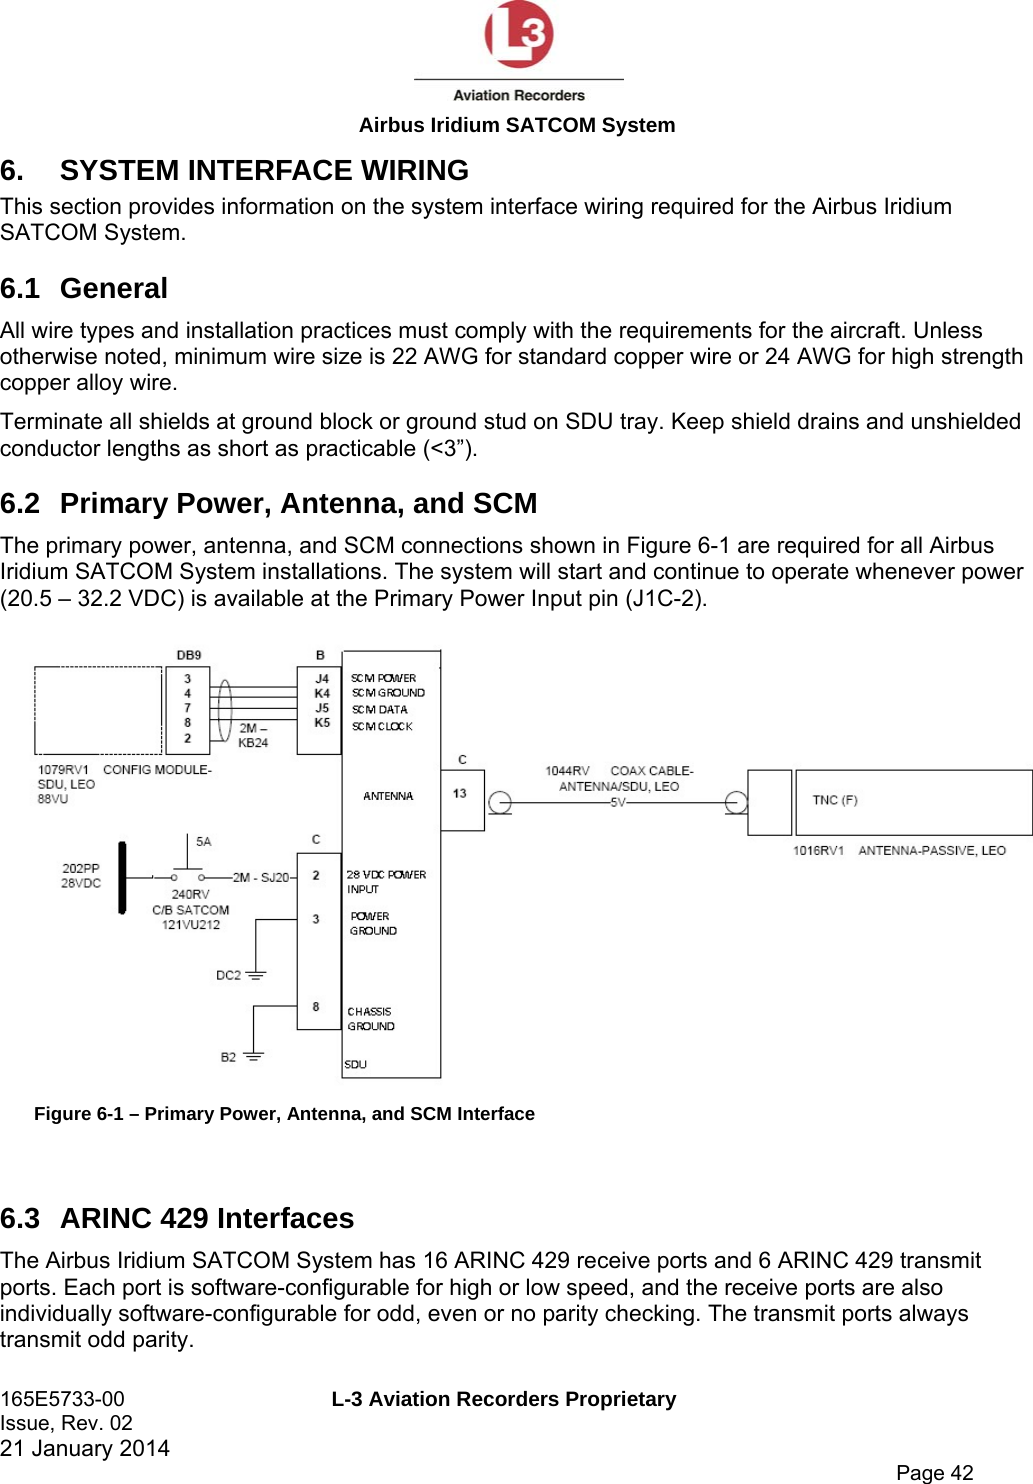  Airbus Iridium SATCOM System 165E5733-00  L-3 Aviation Recorders Proprietary Issue, Rev. 02   21 January 2014      Page 42 6.  SYSTEM INTERFACE WIRING This section provides information on the system interface wiring required for the Airbus Iridium SATCOM System. 6.1 General All wire types and installation practices must comply with the requirements for the aircraft. Unless otherwise noted, minimum wire size is 22 AWG for standard copper wire or 24 AWG for high strength copper alloy wire. Terminate all shields at ground block or ground stud on SDU tray. Keep shield drains and unshielded conductor lengths as short as practicable (&lt;3”). 6.2  Primary Power, Antenna, and SCM The primary power, antenna, and SCM connections shown in Figure 6-1 are required for all Airbus Iridium SATCOM System installations. The system will start and continue to operate whenever power (20.5 – 32.2 VDC) is available at the Primary Power Input pin (J1C-2).   Figure 6-1 – Primary Power, Antenna, and SCM Interface  6.3  ARINC 429 Interfaces The Airbus Iridium SATCOM System has 16 ARINC 429 receive ports and 6 ARINC 429 transmit ports. Each port is software-configurable for high or low speed, and the receive ports are also individually software-configurable for odd, even or no parity checking. The transmit ports always transmit odd parity. 